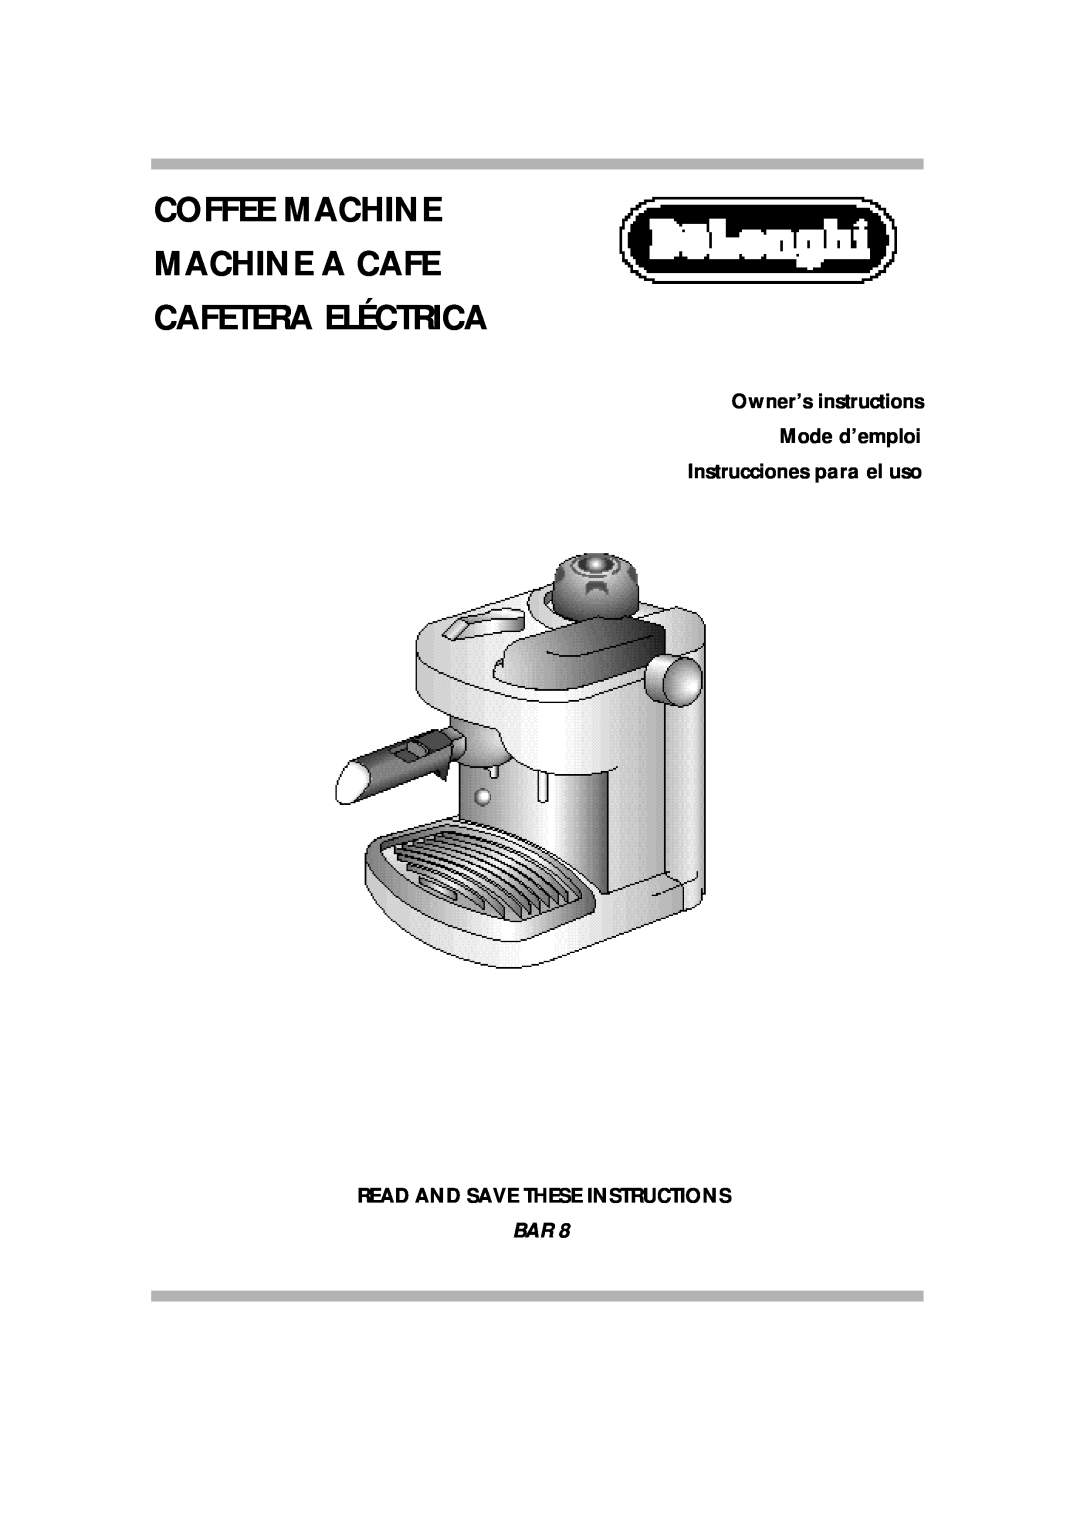 DeLonghi BAR8 manual Coffee Machine Machine A Cafe Cafetera Eléctrica, Owner’s instructions Mode d’emploi 